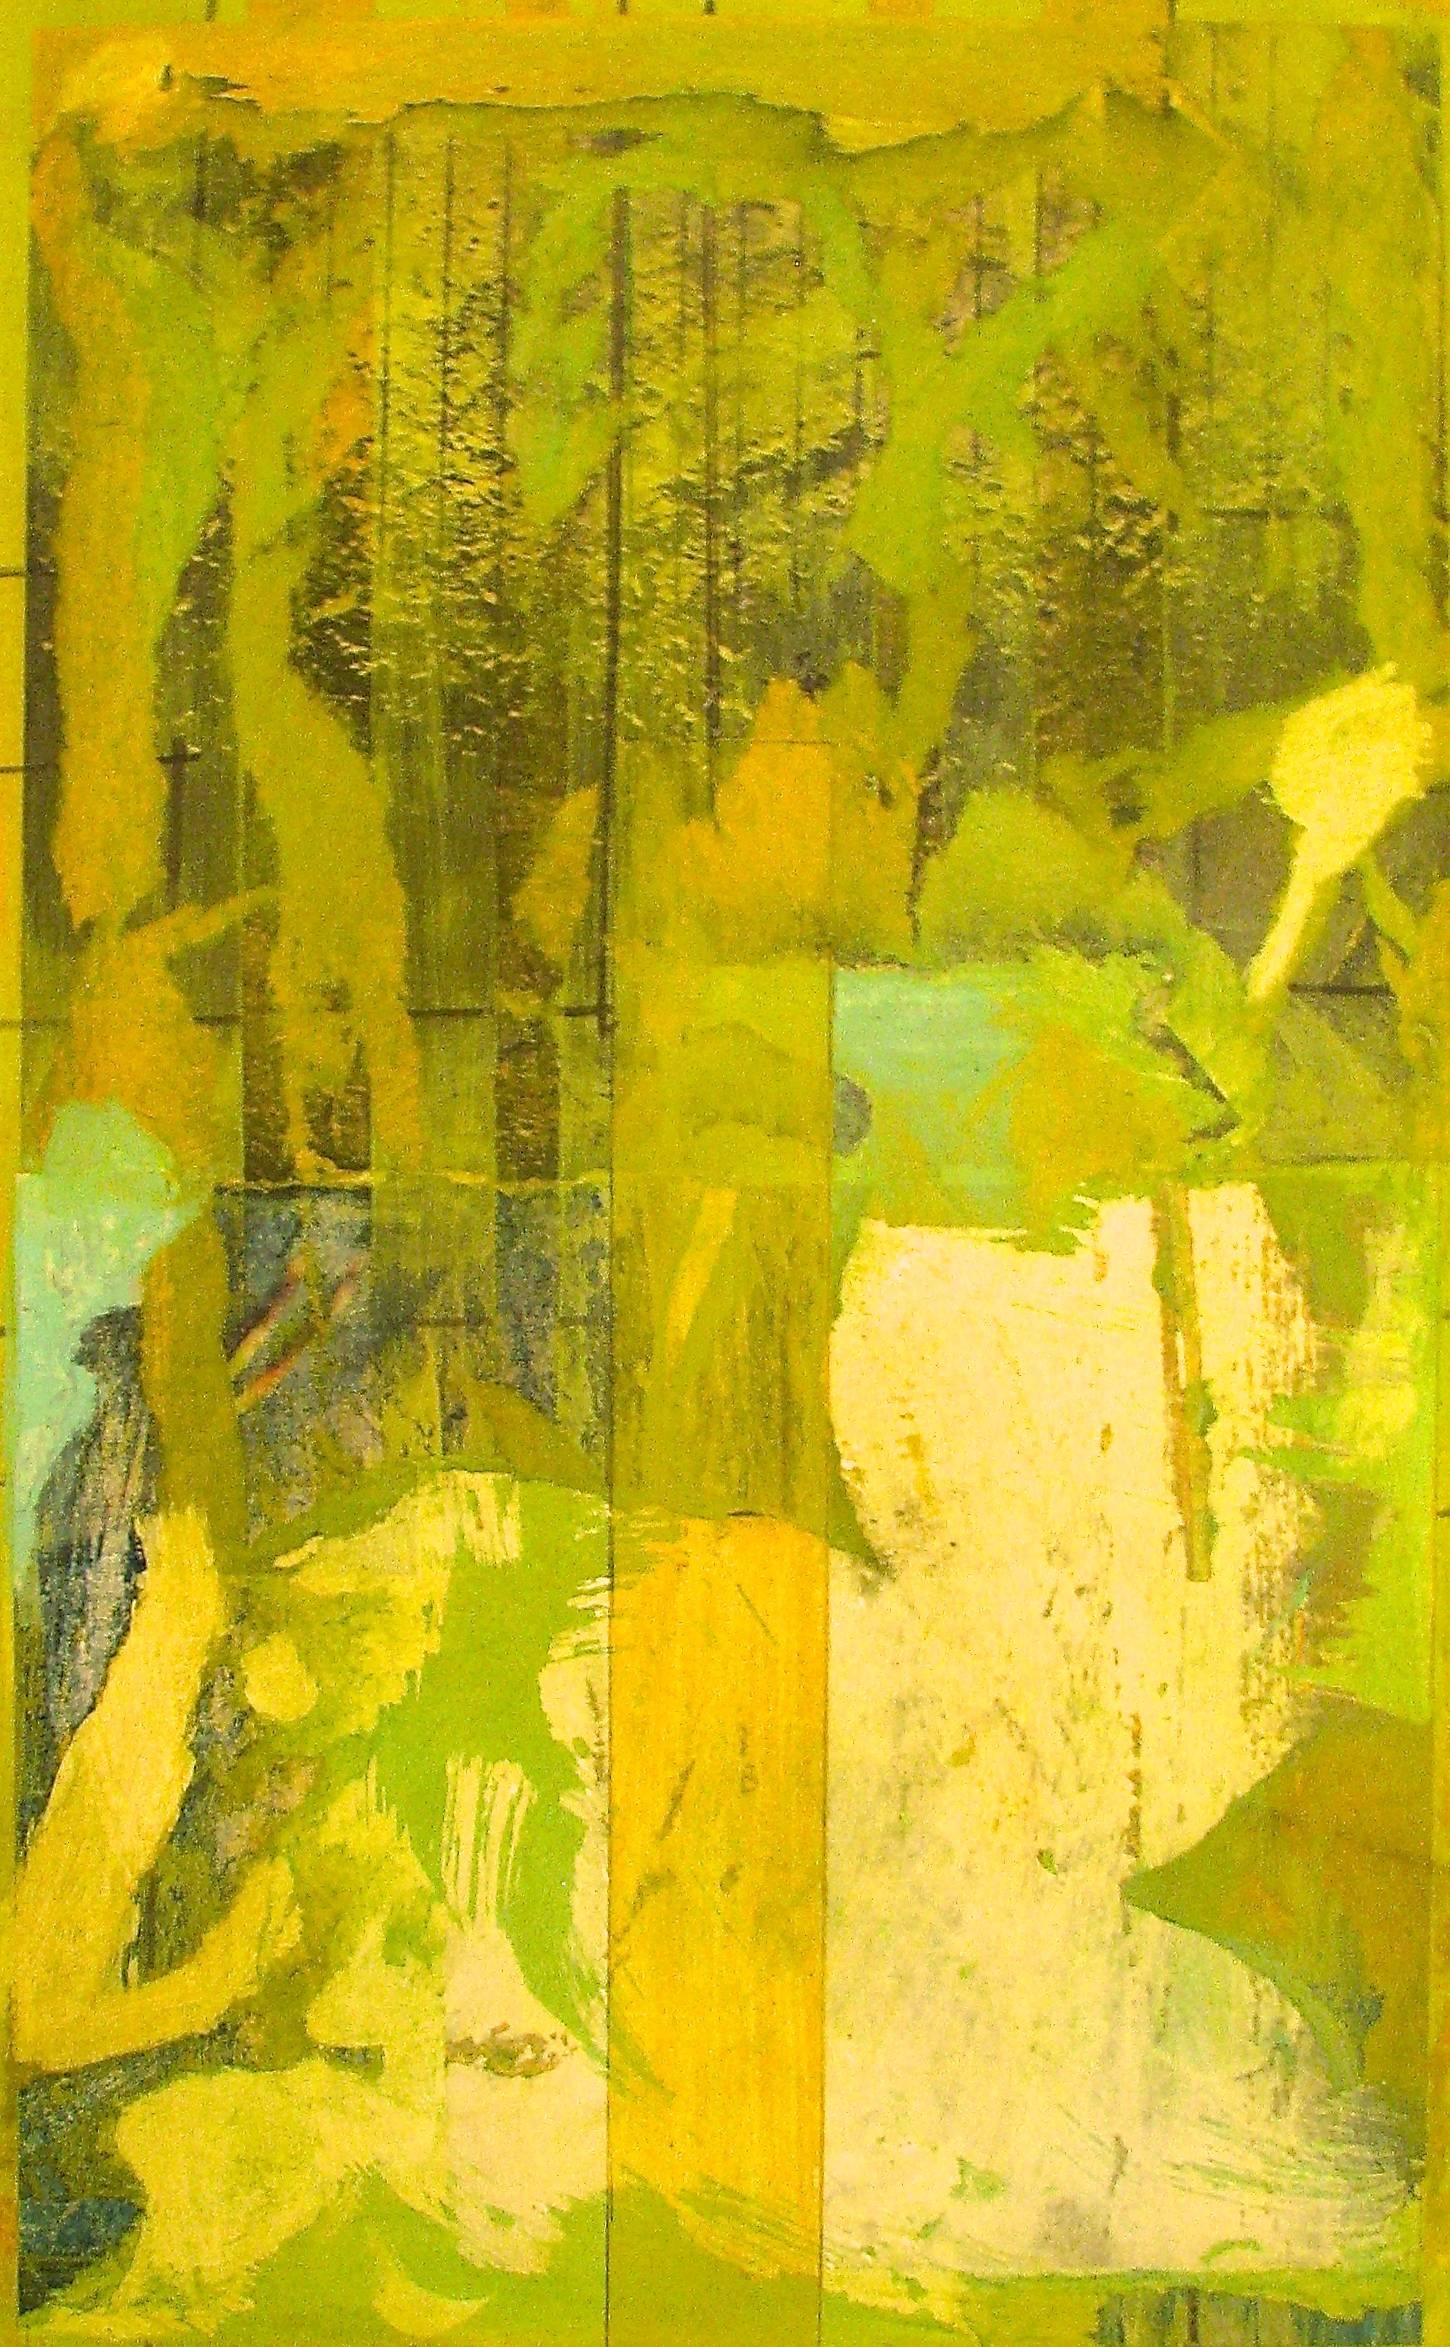 Nancy Berlin Abstract Drawing - "Exploration 2" Abstract Expressionist Modern Contemporary Green Mixed Media